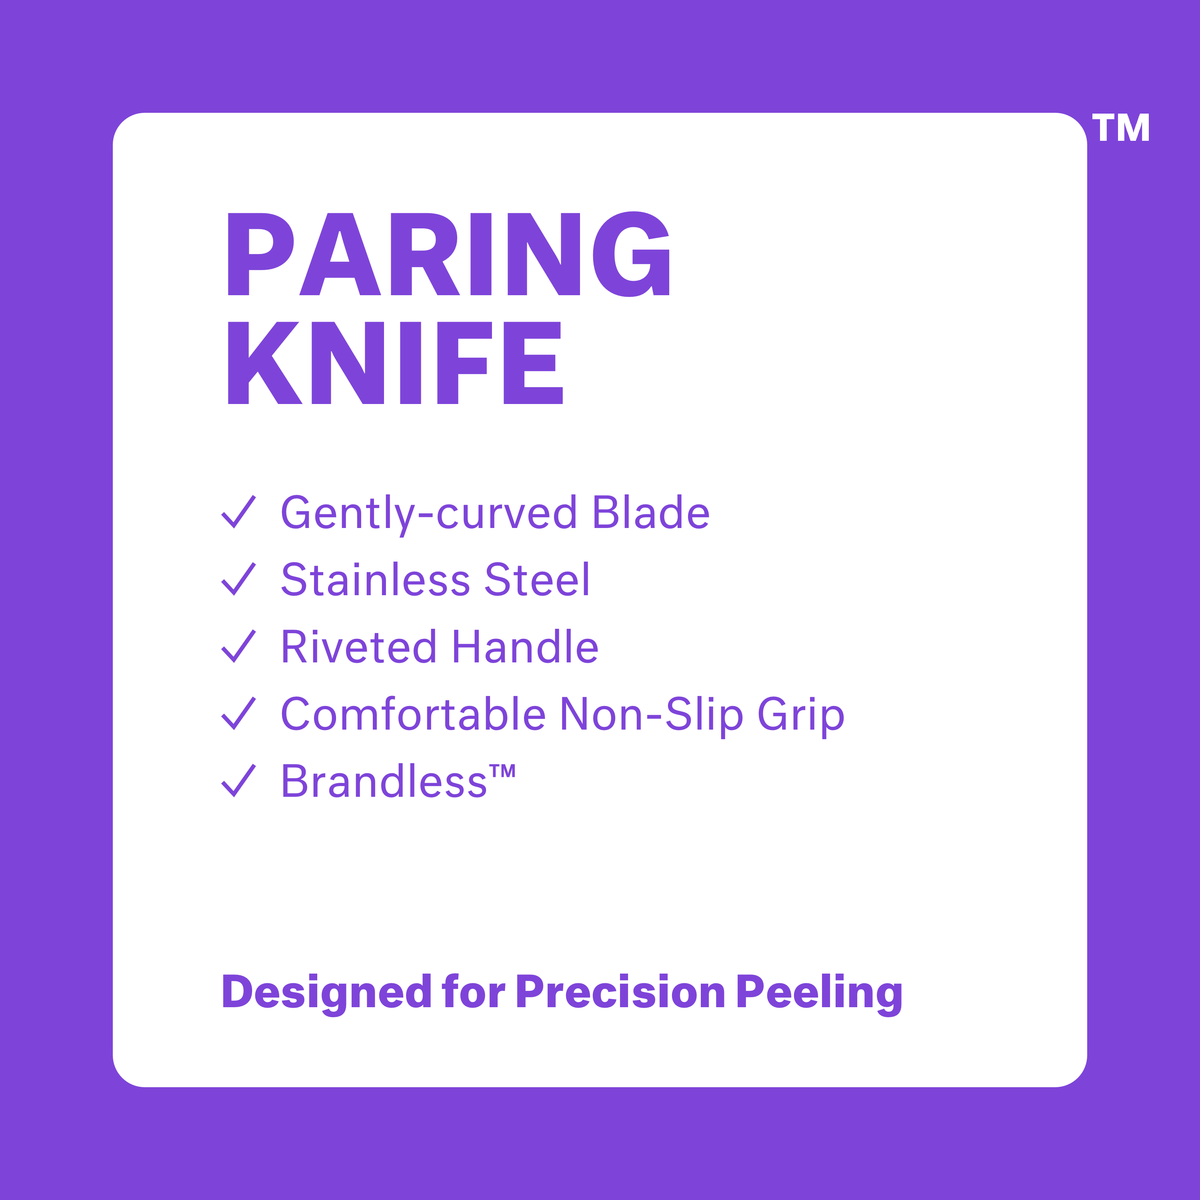 Paring Knife. Gently-curved blade. Stainless steel. Riveted handle. Comfortable non-slip grip. Brandless. Designed for precision peeling.